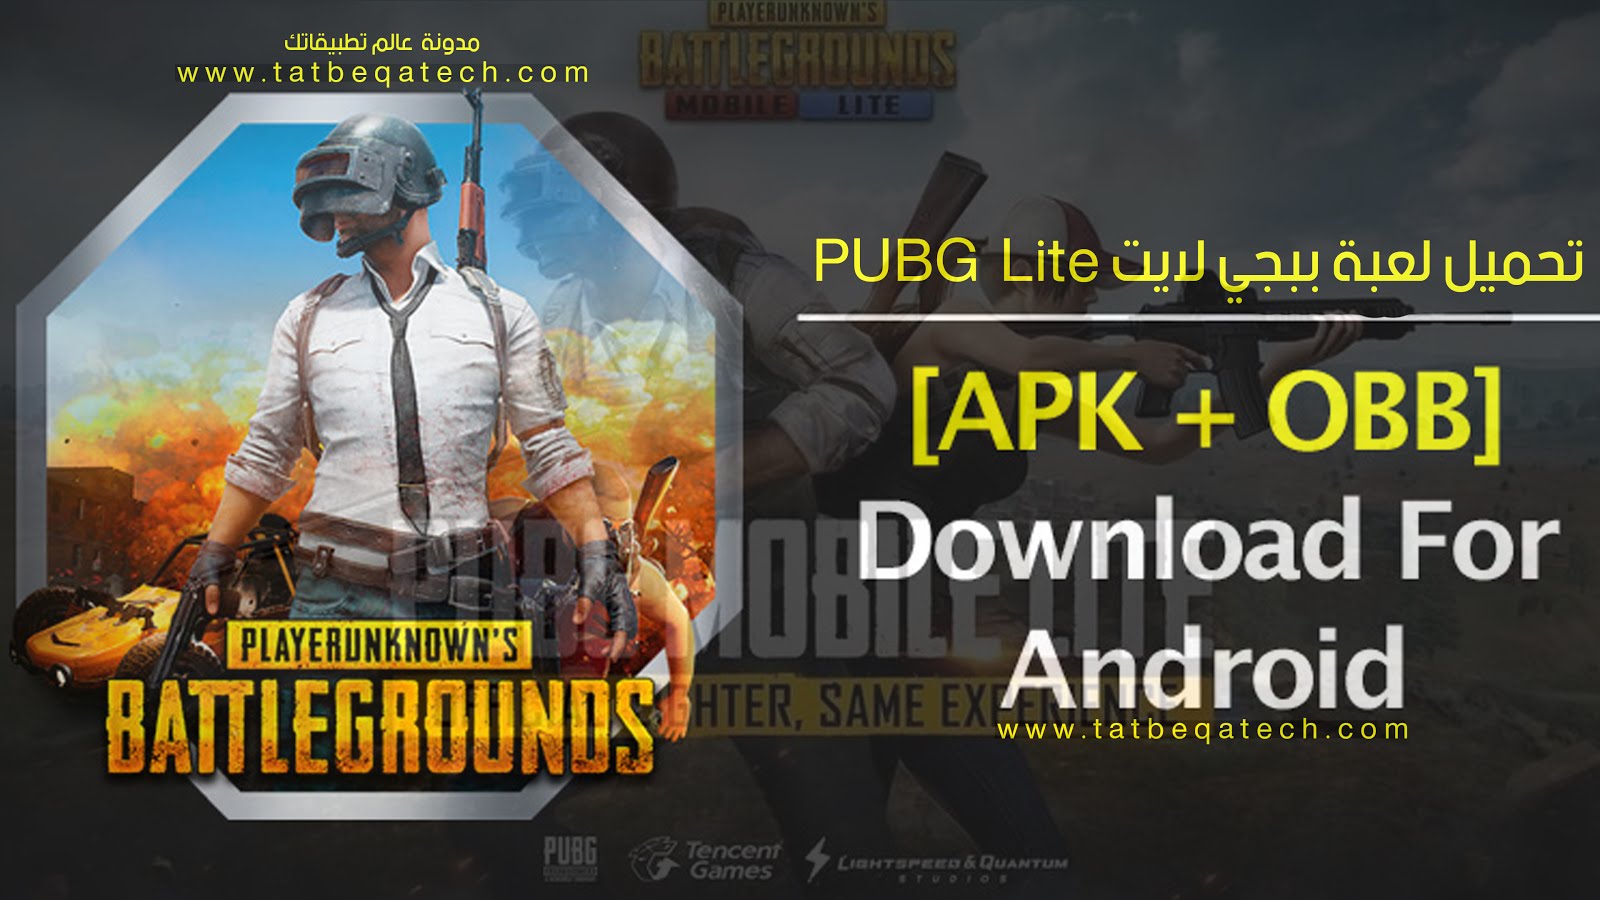 Downloading obb service is running pubg фото 78